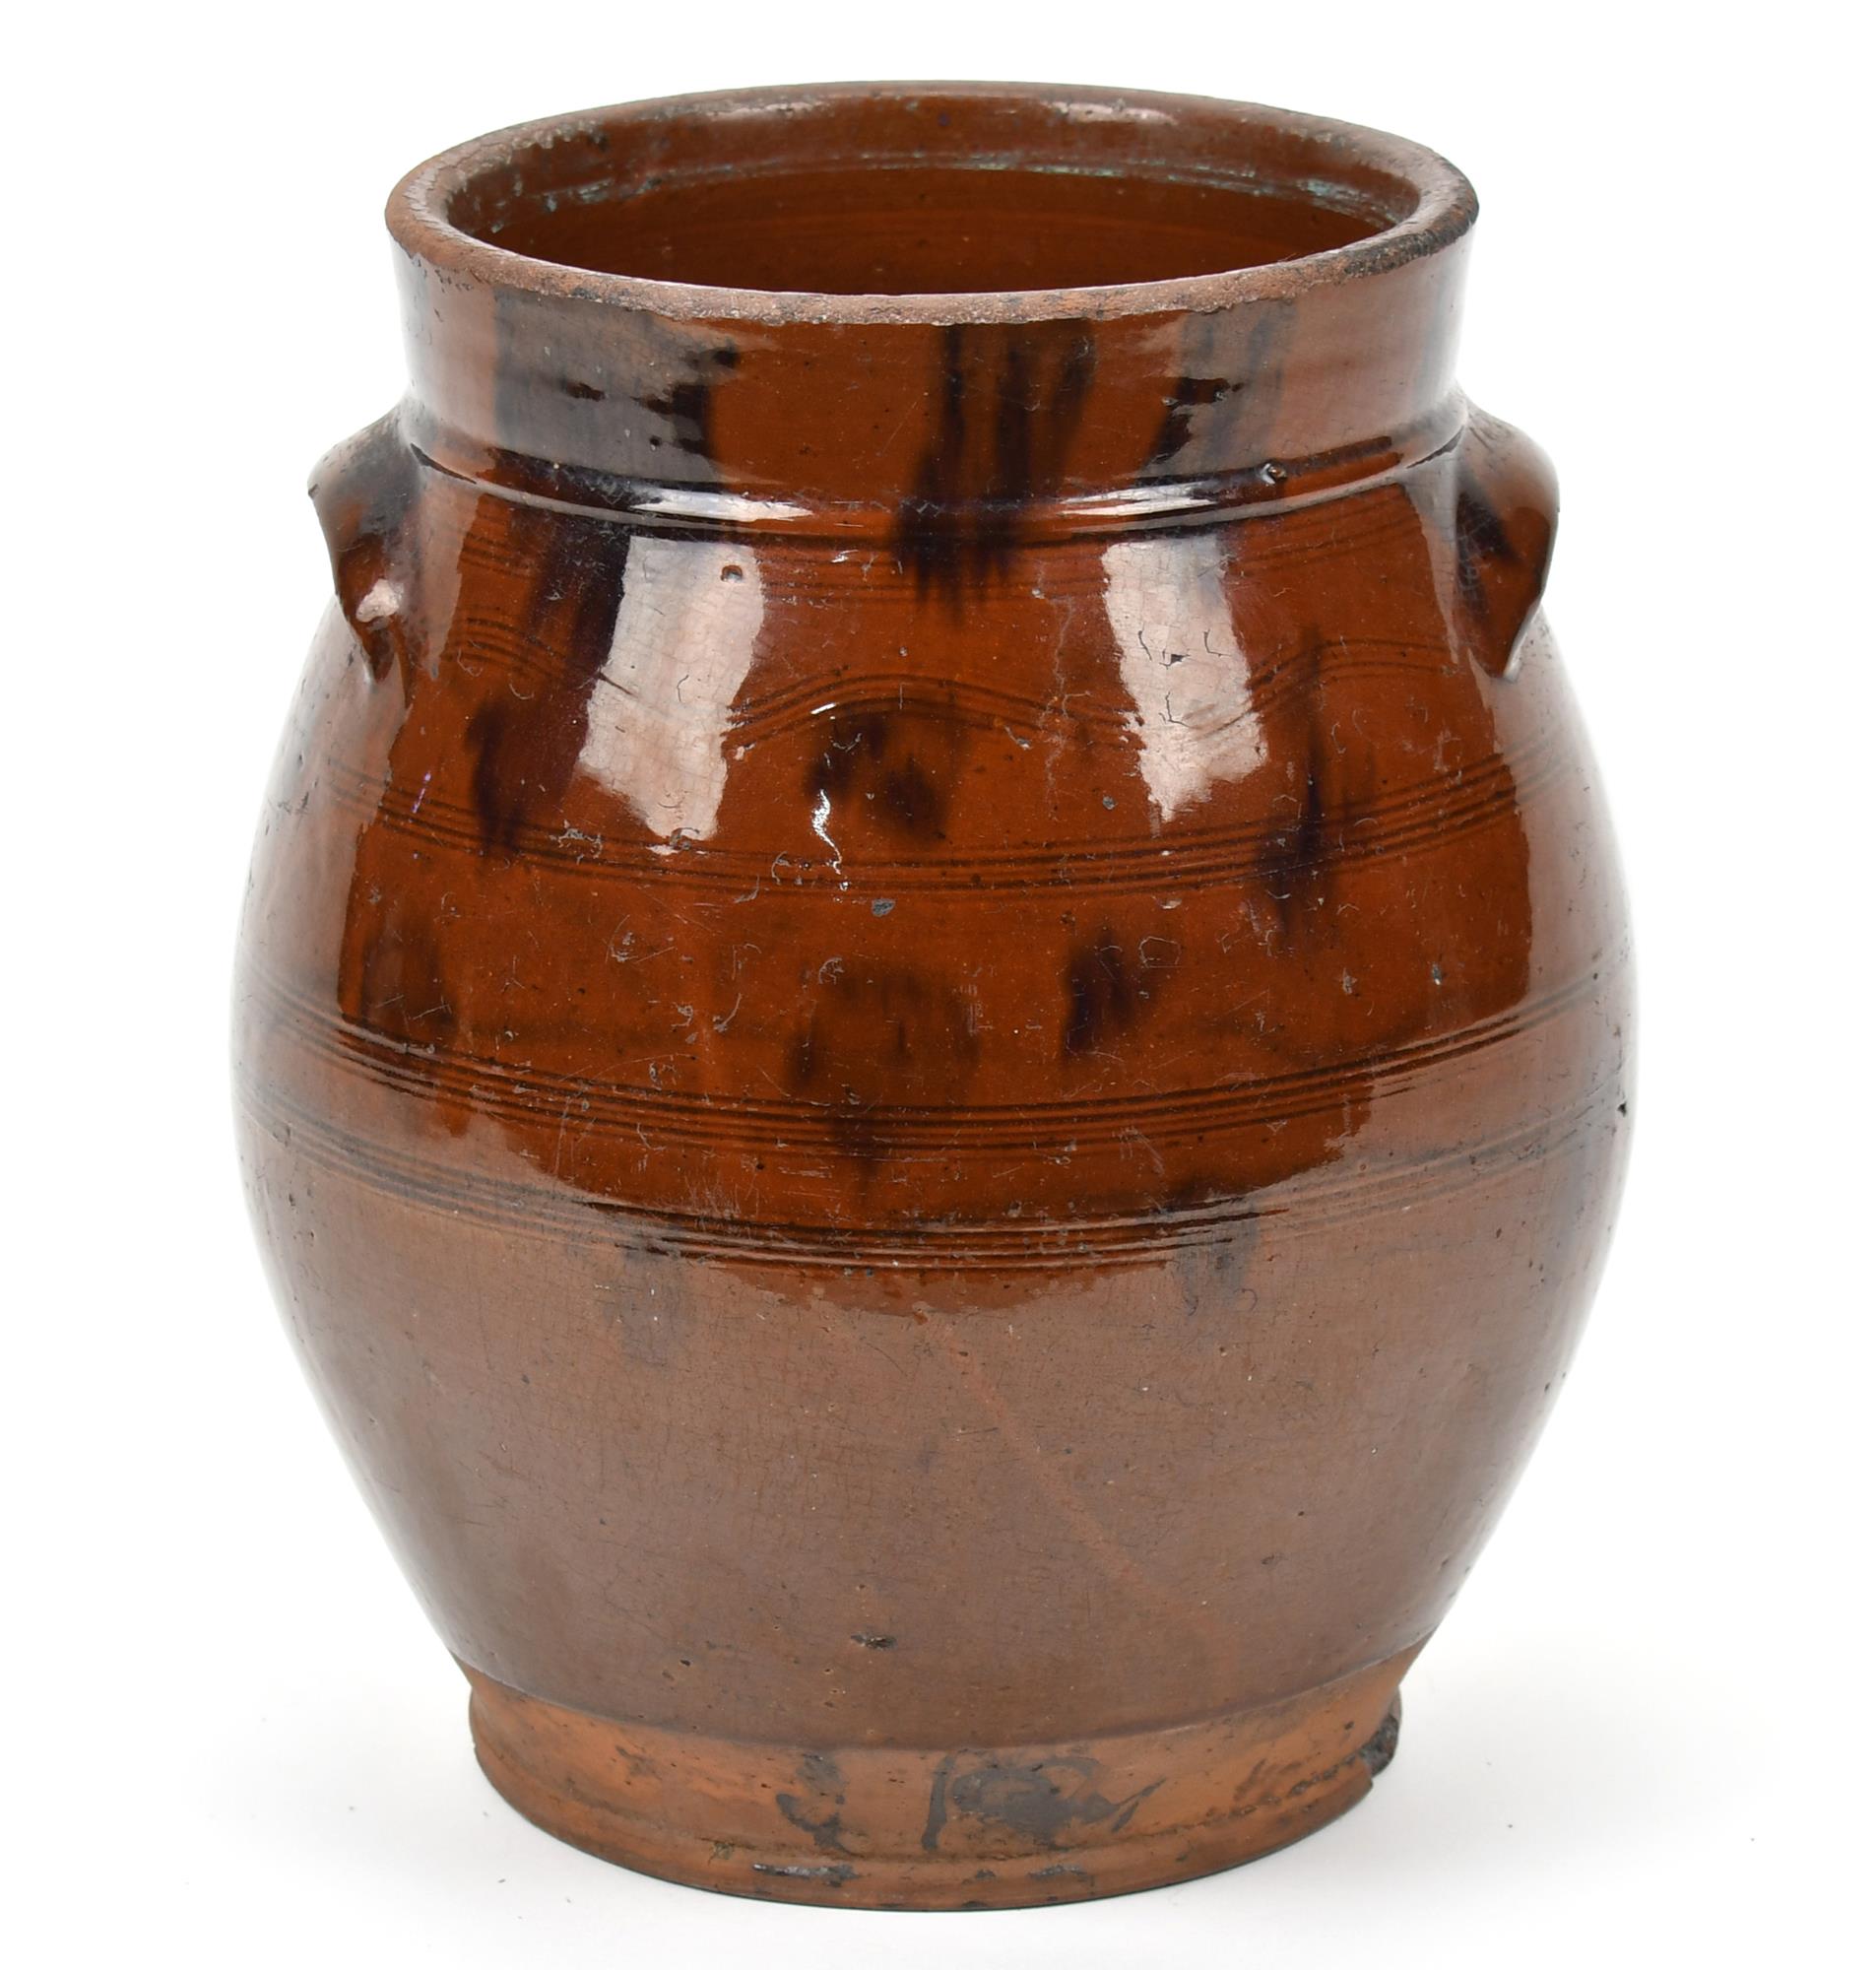 EARLY OVOID REDWARE CROCK. Larger size